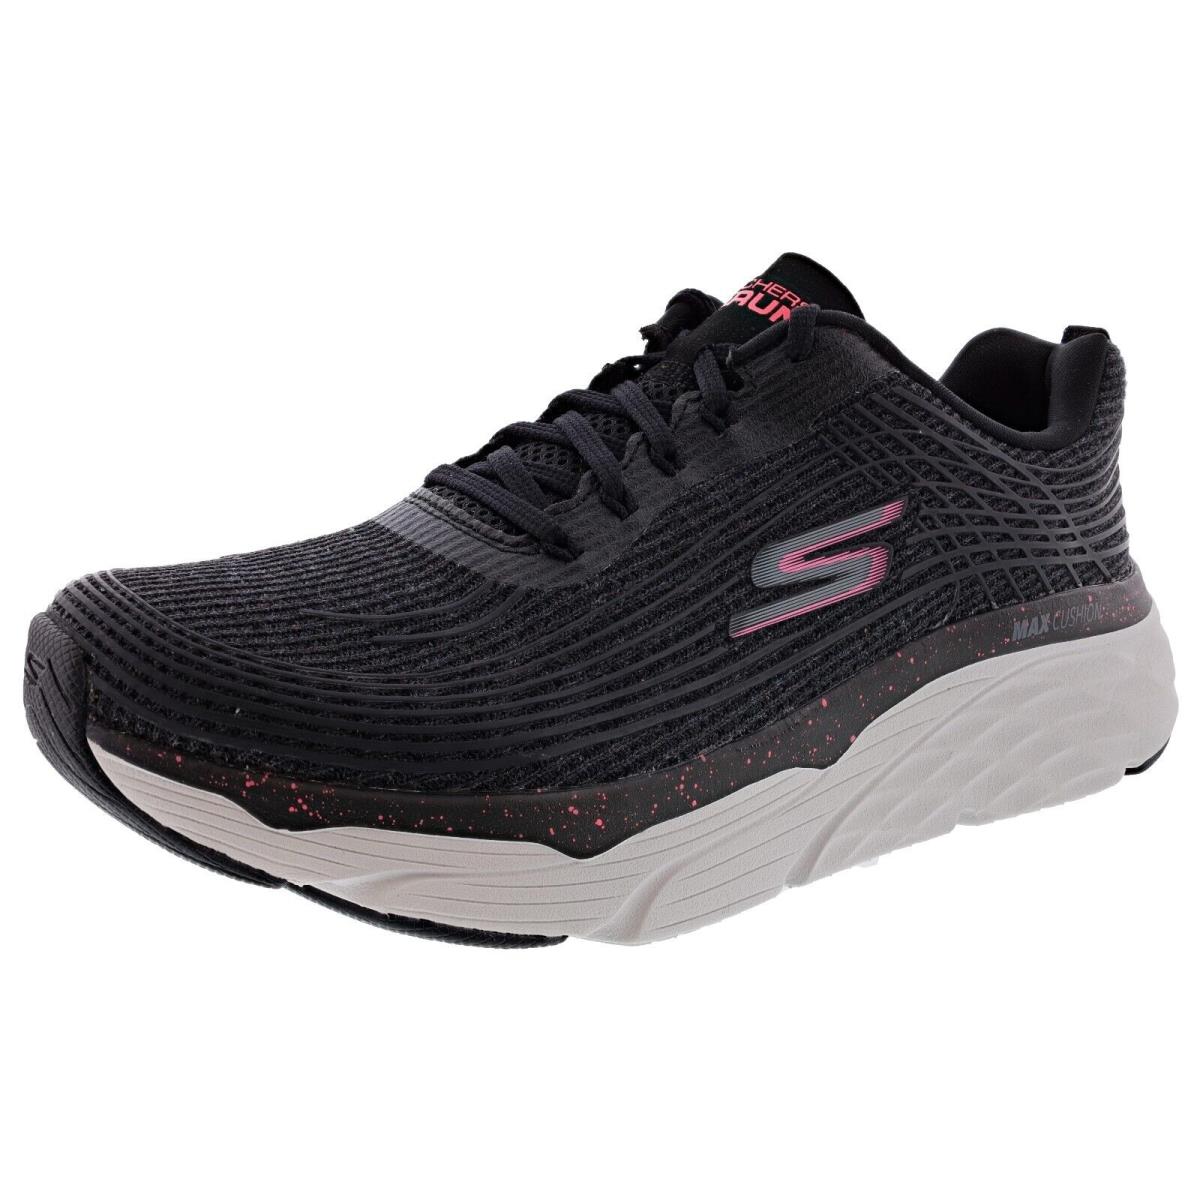 Skechers Women`s Max Cushioning Elite-your Planet 128535 Running Shoes BLACK / HOT PINK